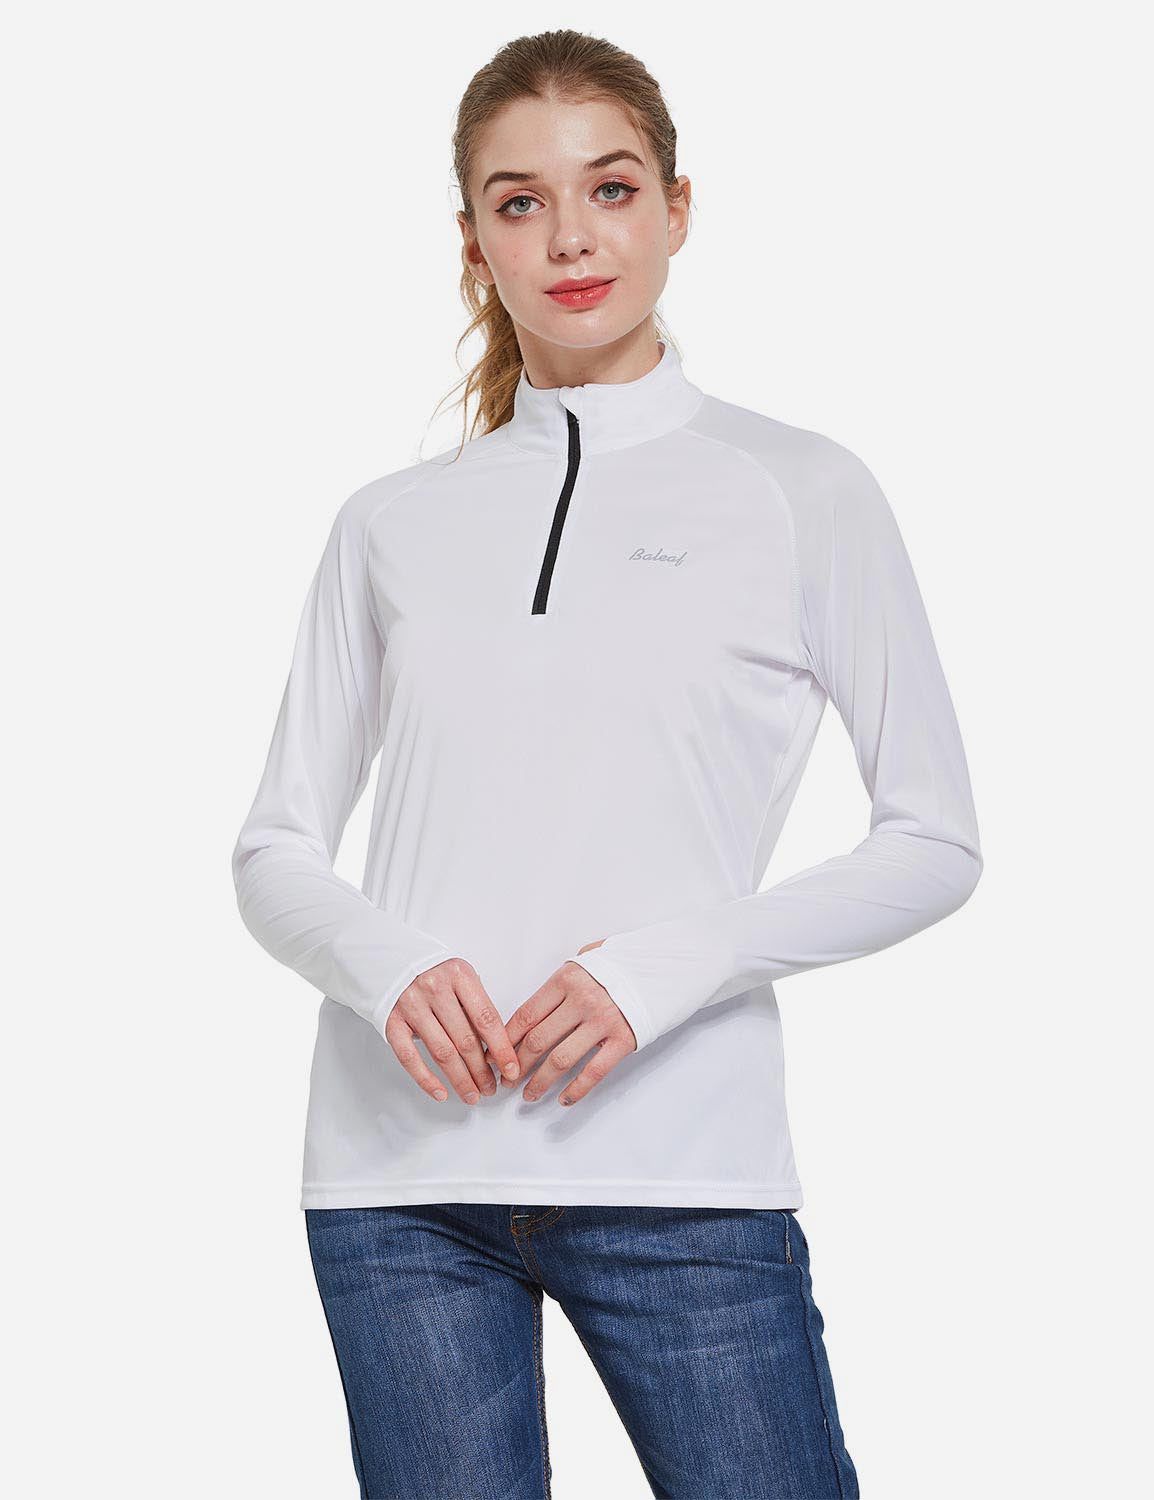 Baleaf Women's Collared Long Sleeved Pullover w Thumbholes